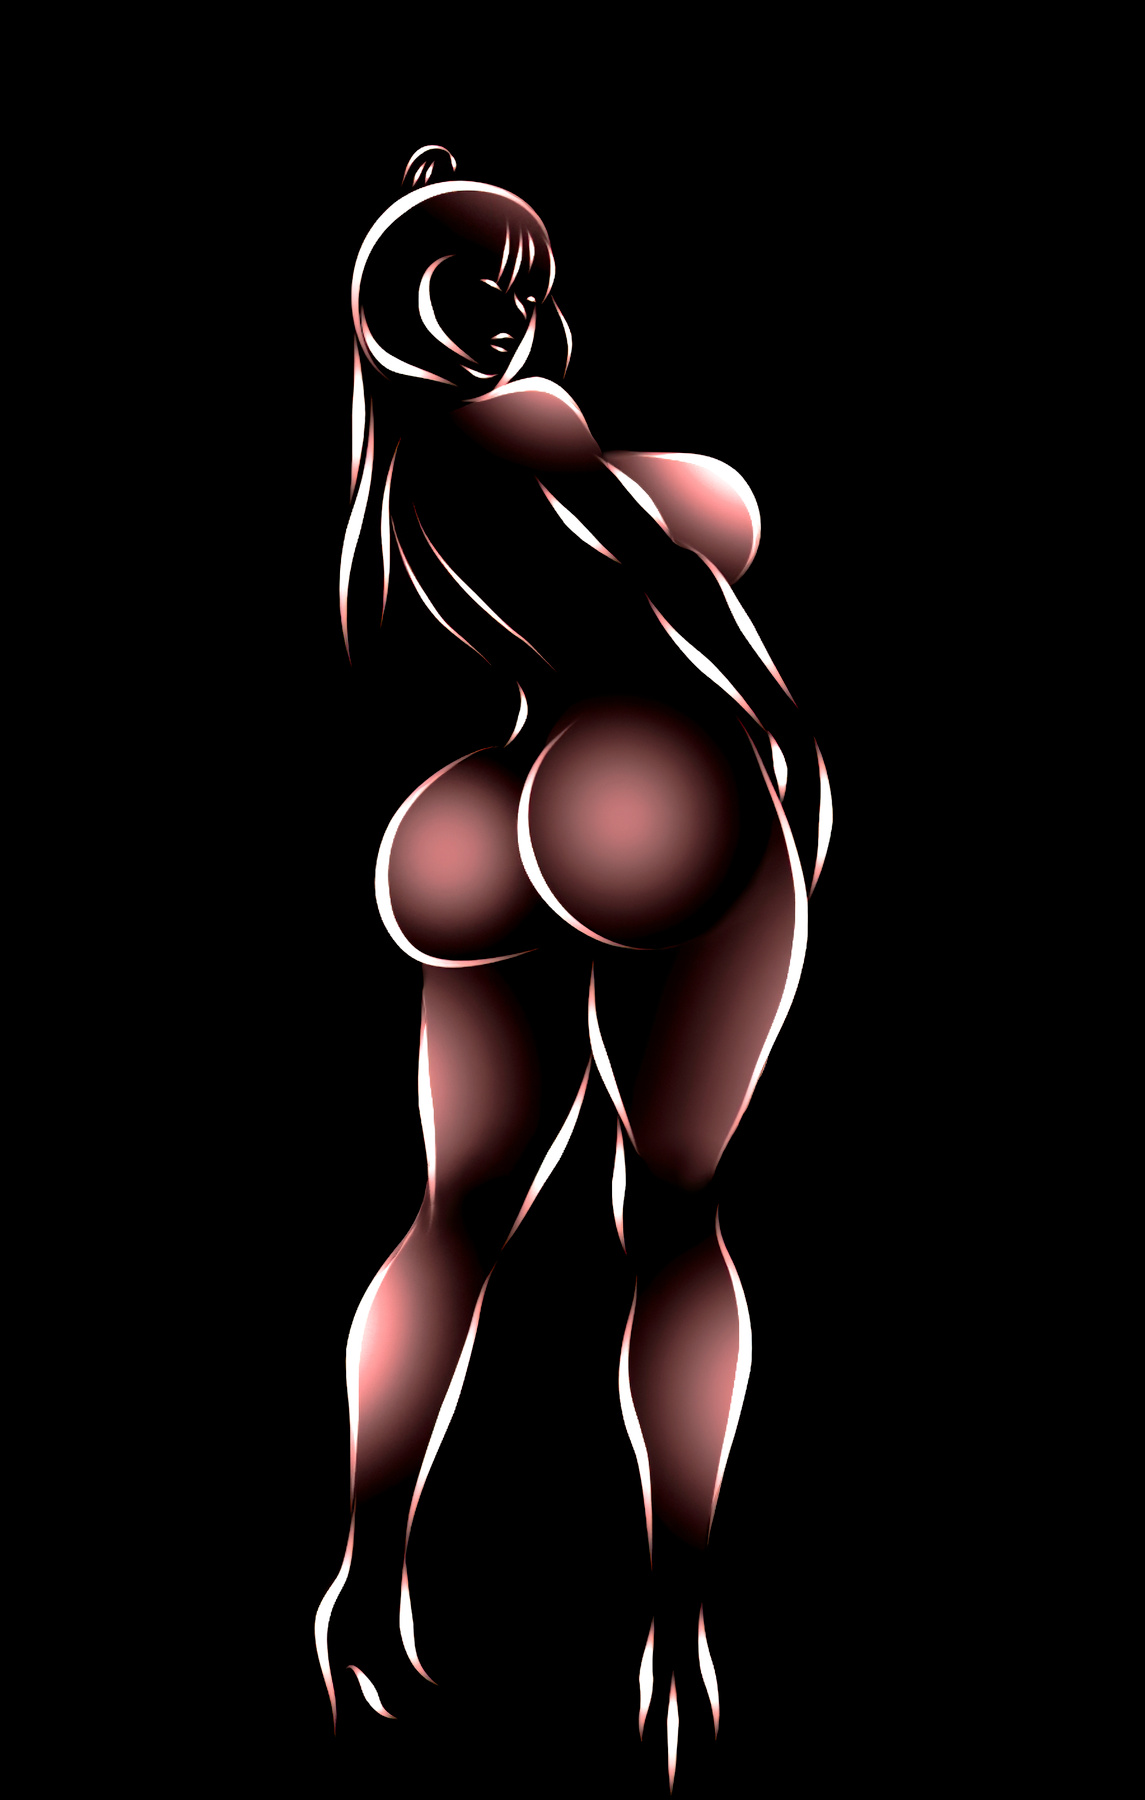 The girl stands half a turn. breast erotic glamour ideal naked nude perfect perfection illustration drawing art digital sensual skin vogue elegance gorgeous hairstyle lady luxury sexy body curly female model posing pretty adult attractive beauty black fashion woman young artistic bab